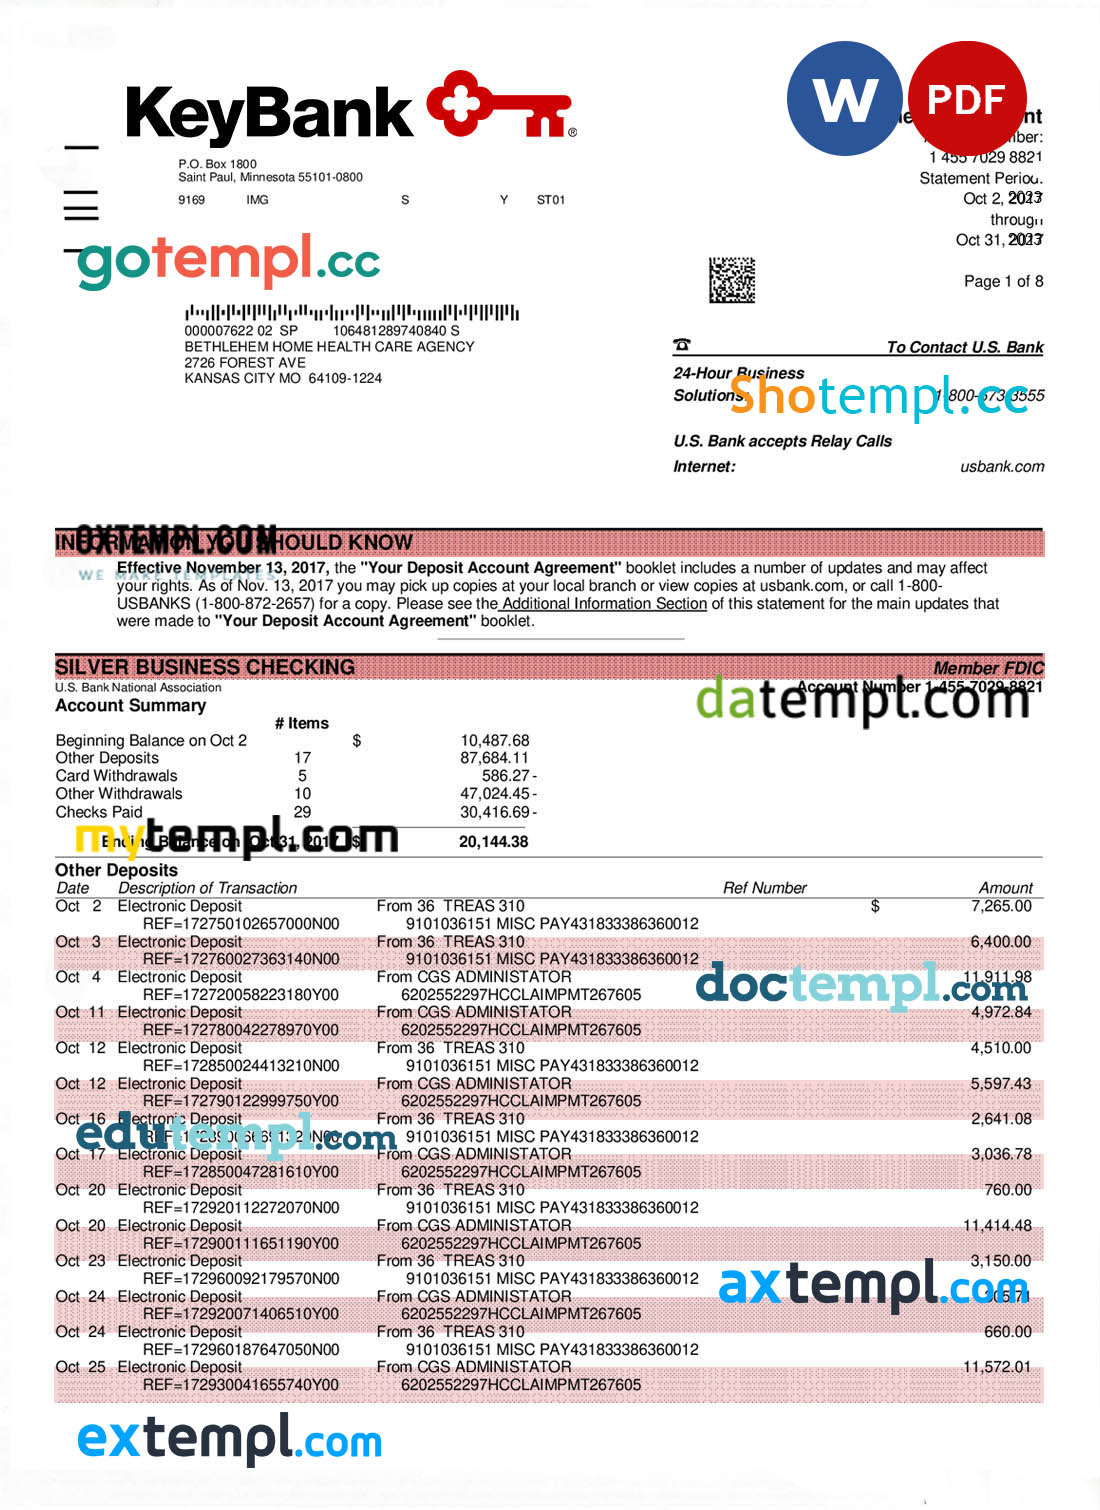 Keybank business bank statement Word and PDF template